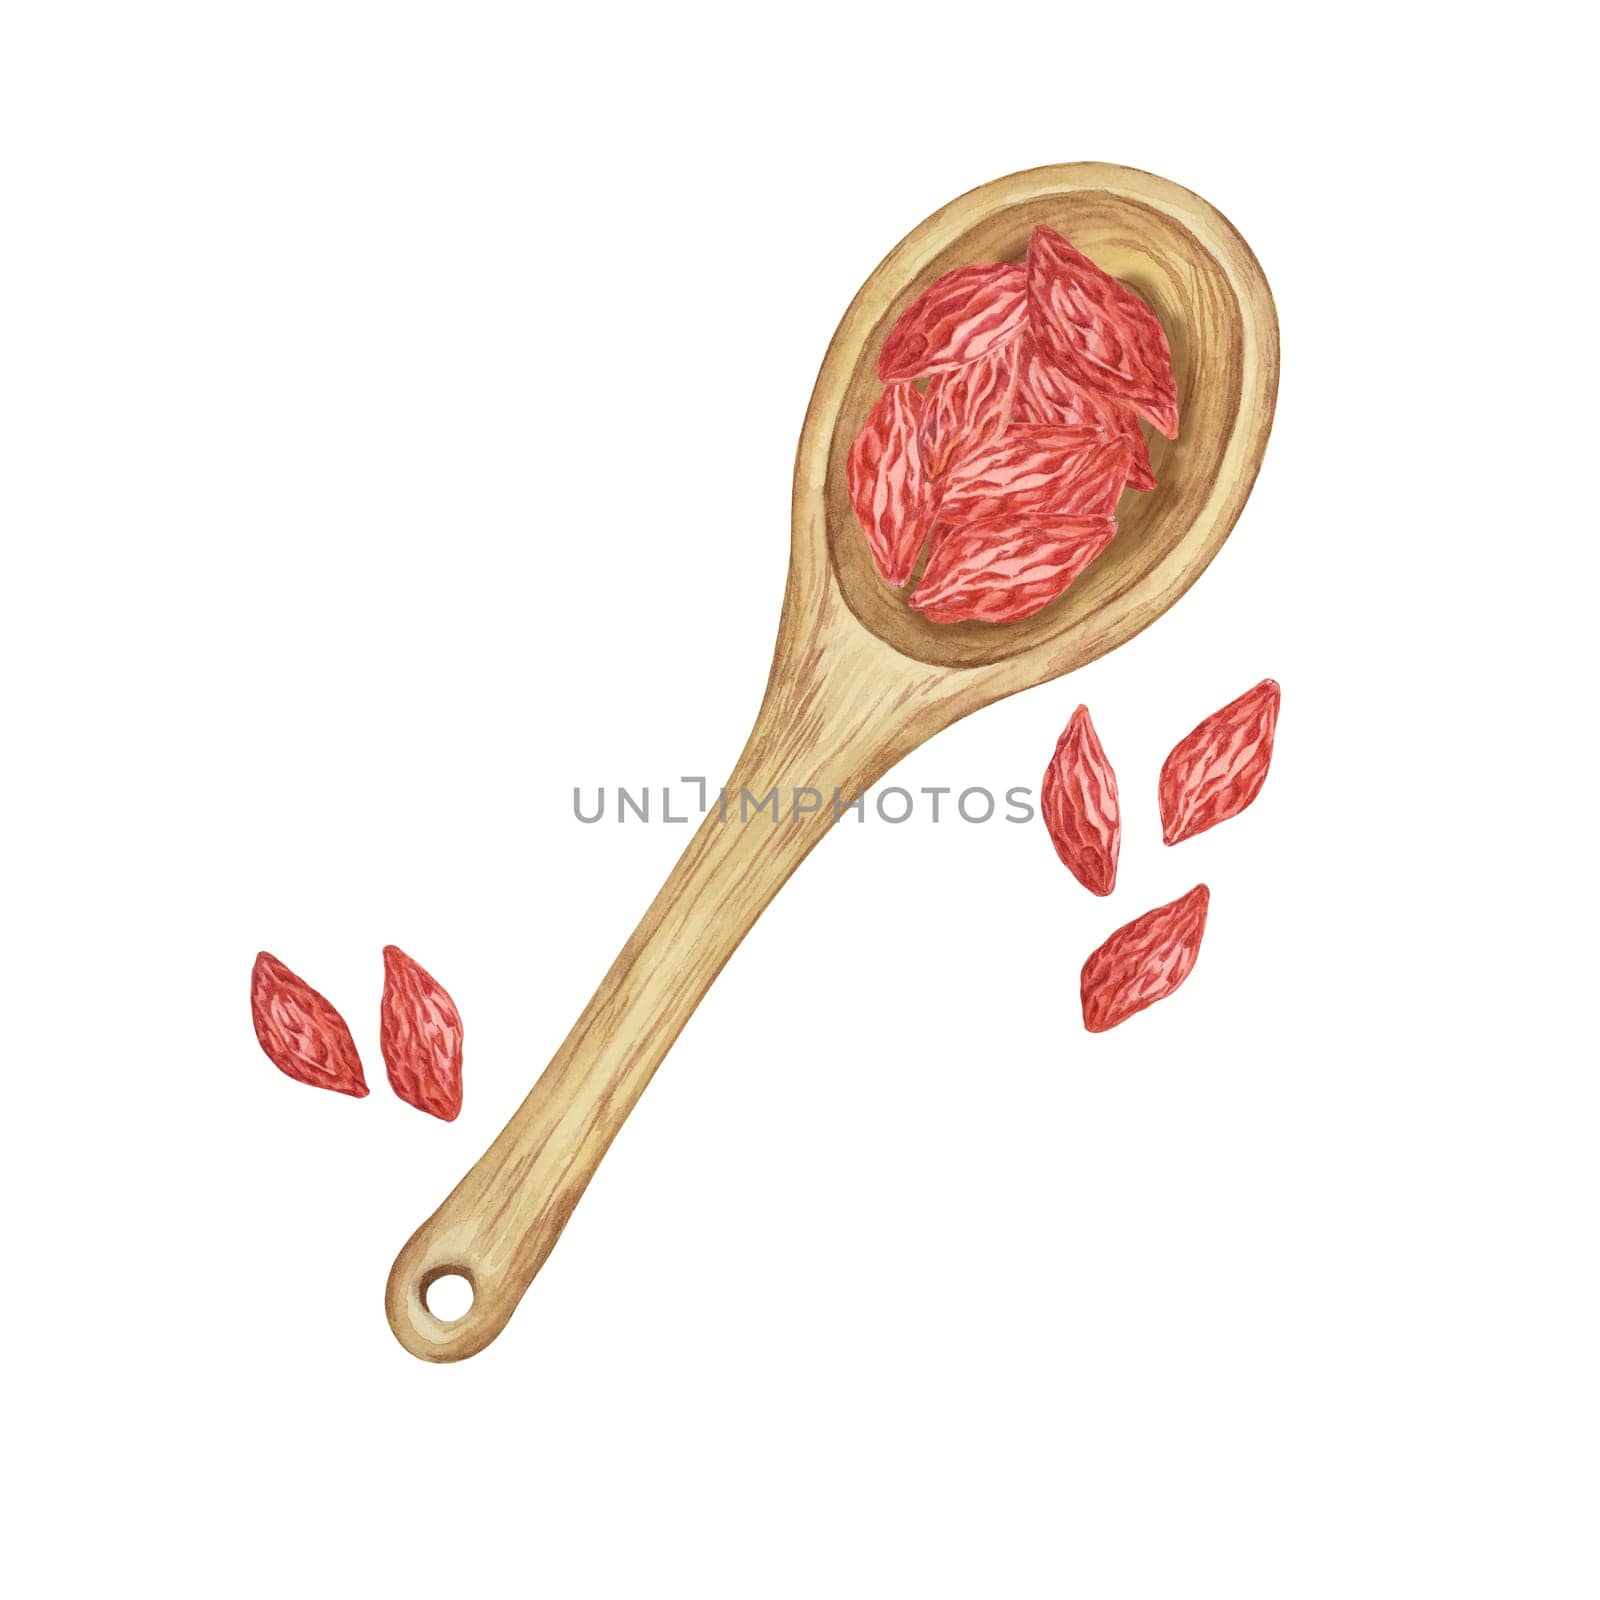 Wooden spoon with dry goji berries in watercolor isolated on white background. Hand-drawn clipart of licium barbarum fruits. Design for printing, packaging, cards, posters, food supplements